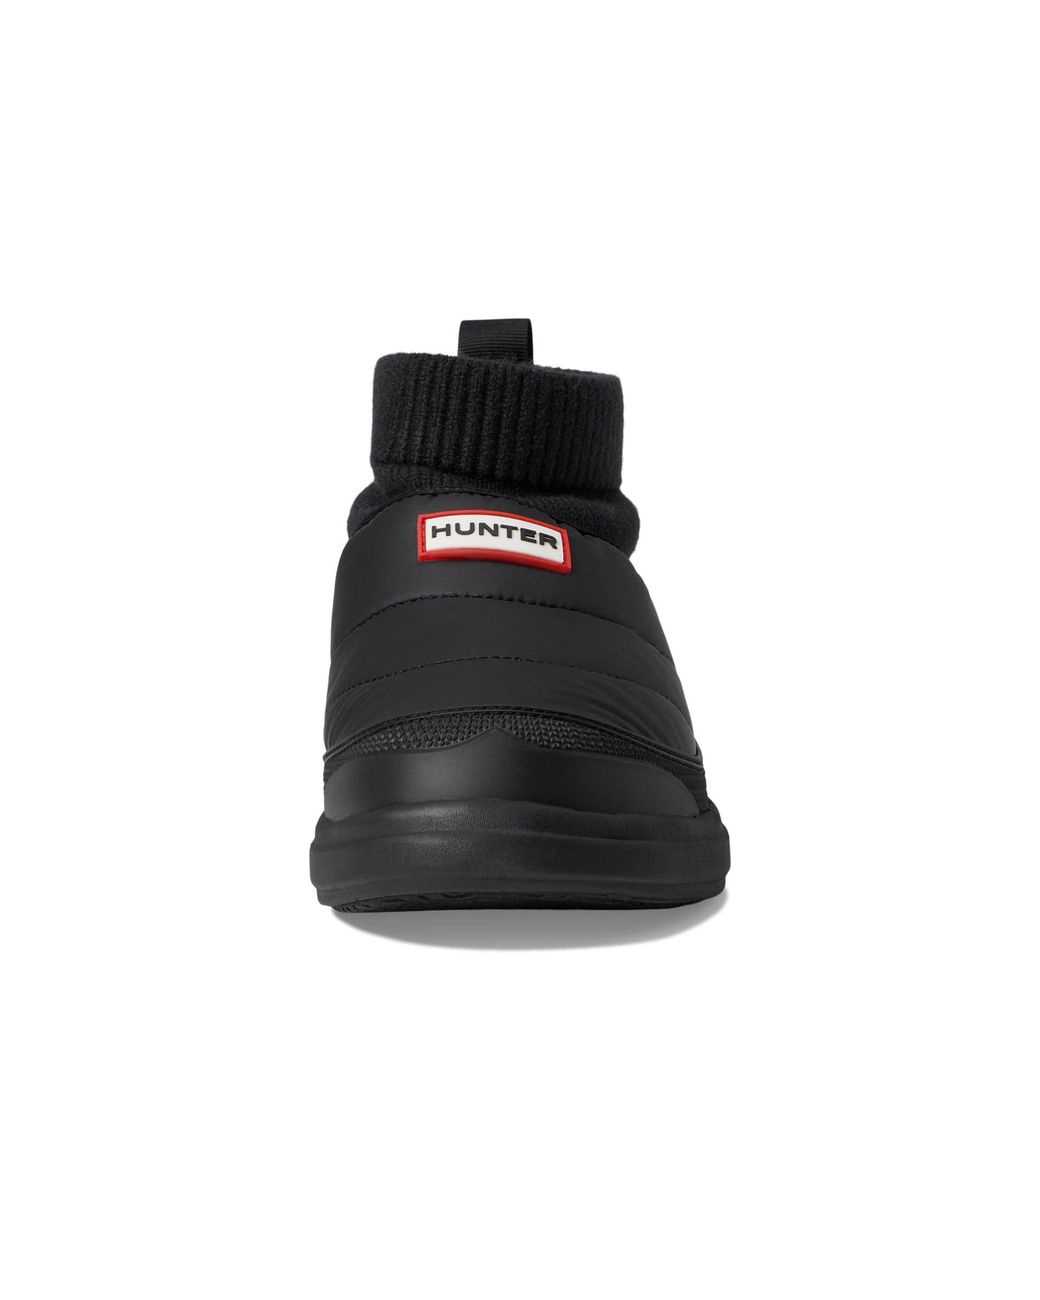 HUNTER In/out Puffer Knit Boot in Black | Lyst